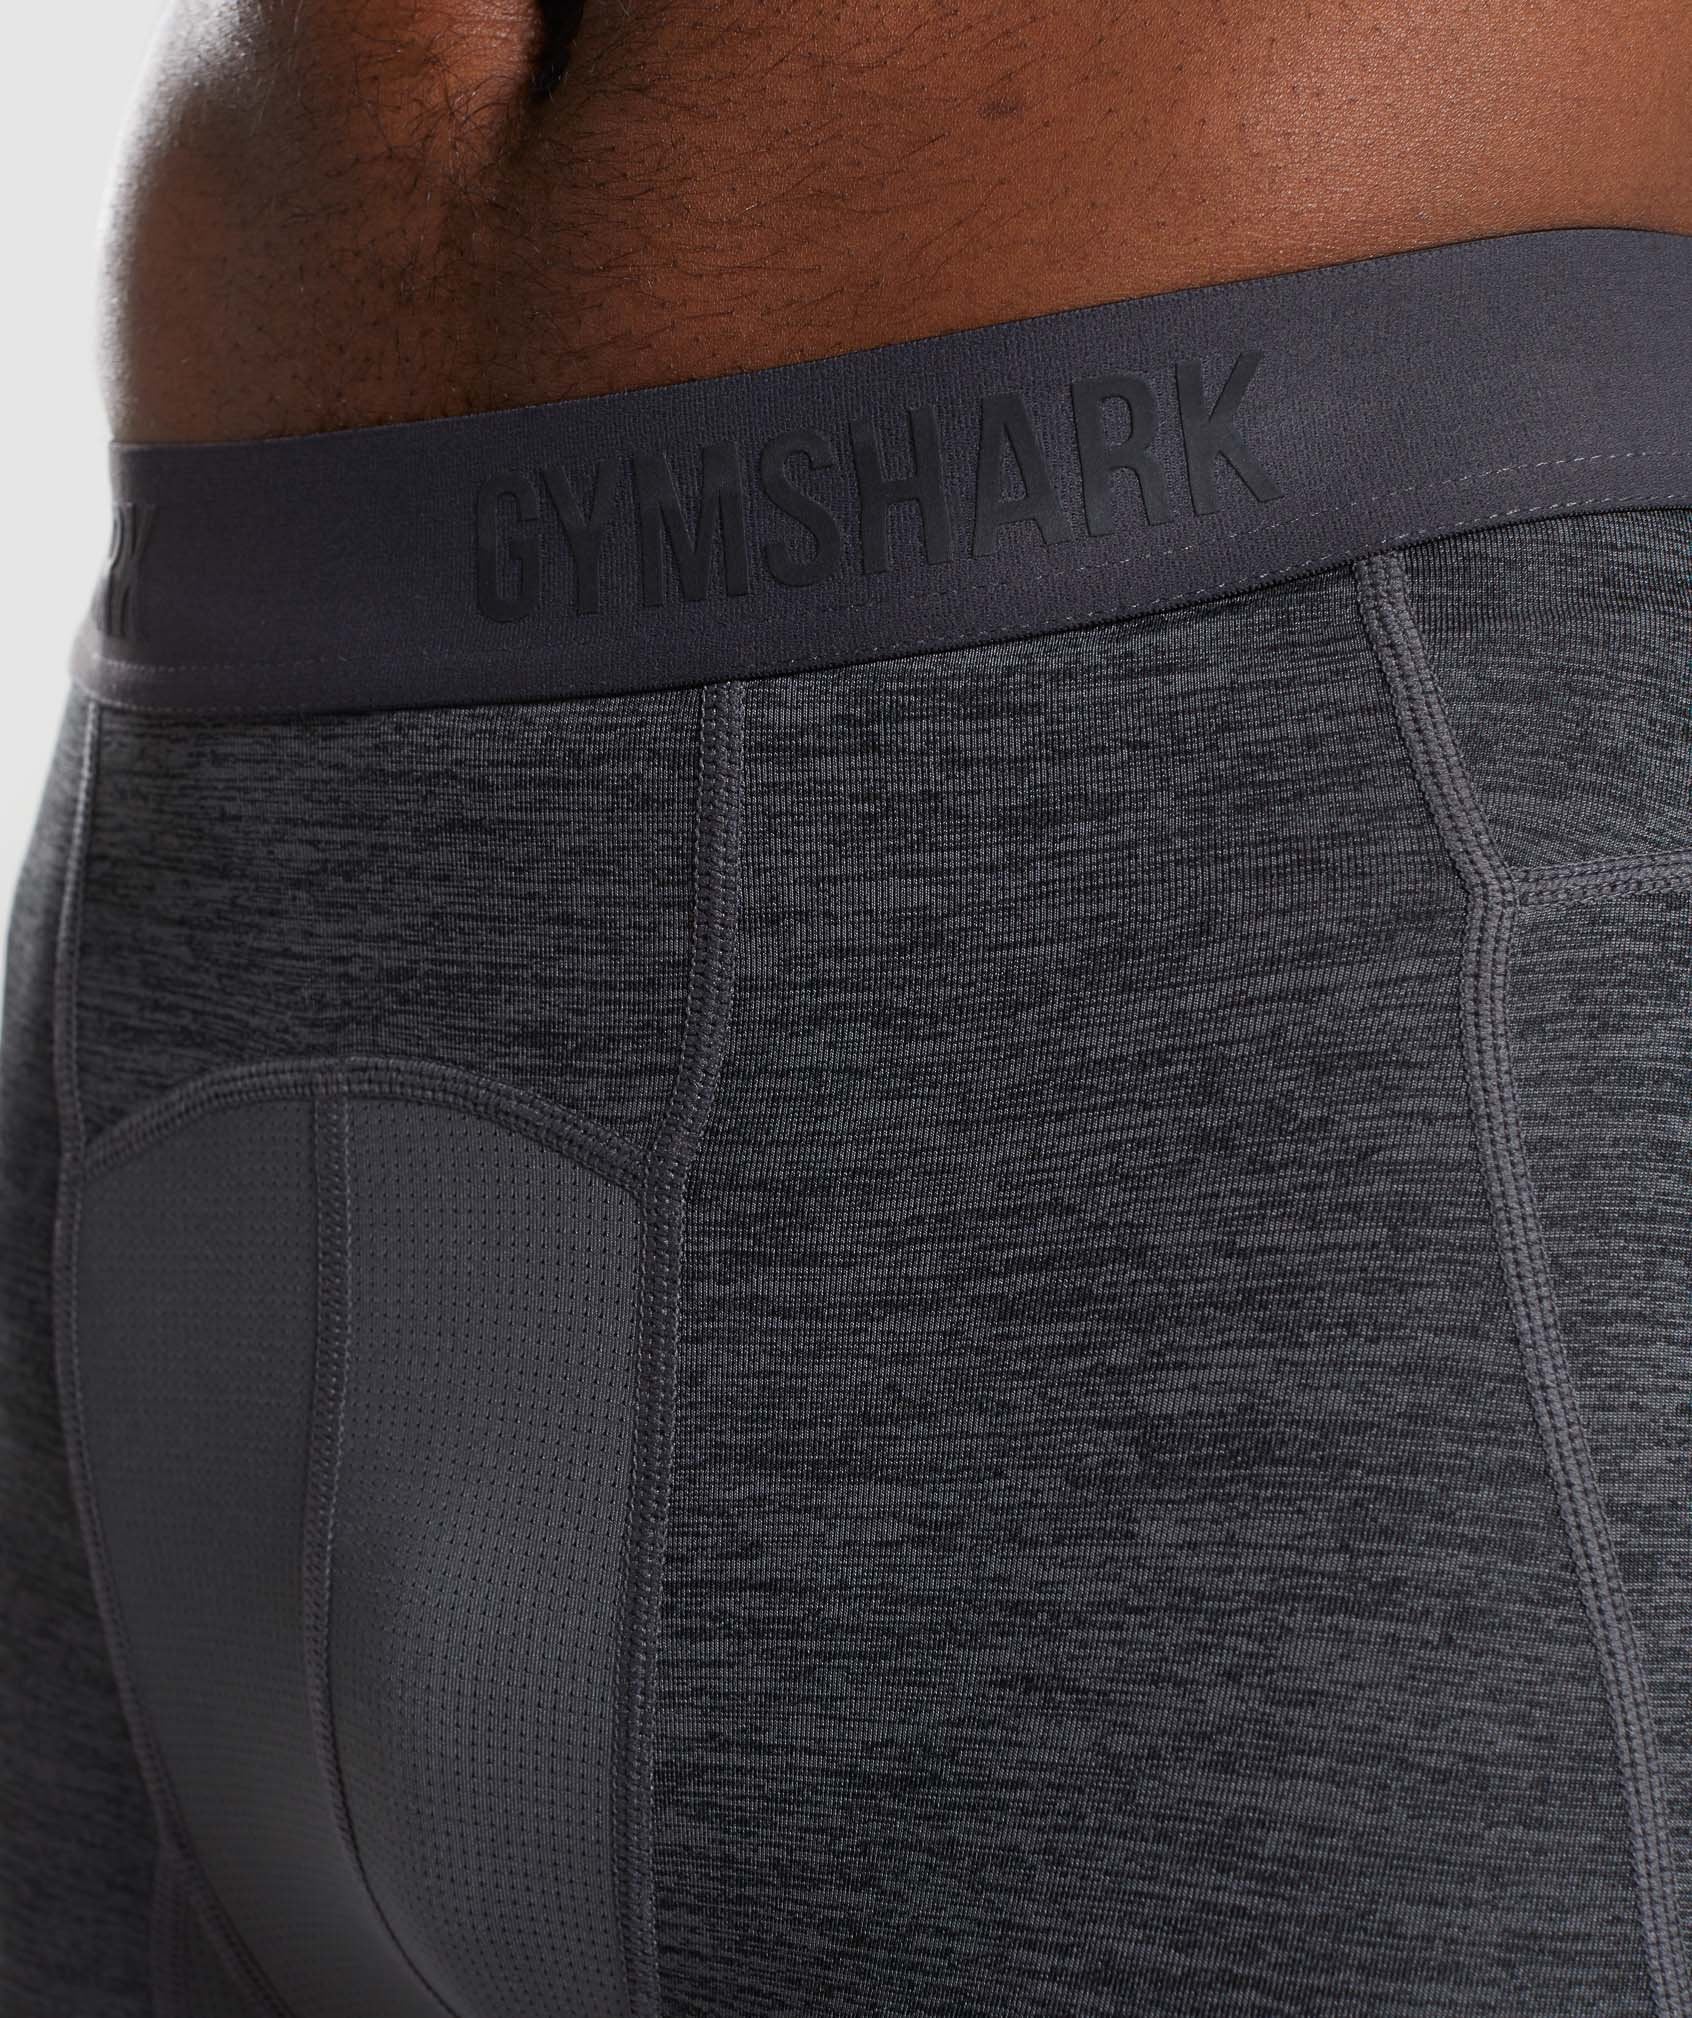 Element+ Baselayer Shorts in Black Marl - view 5